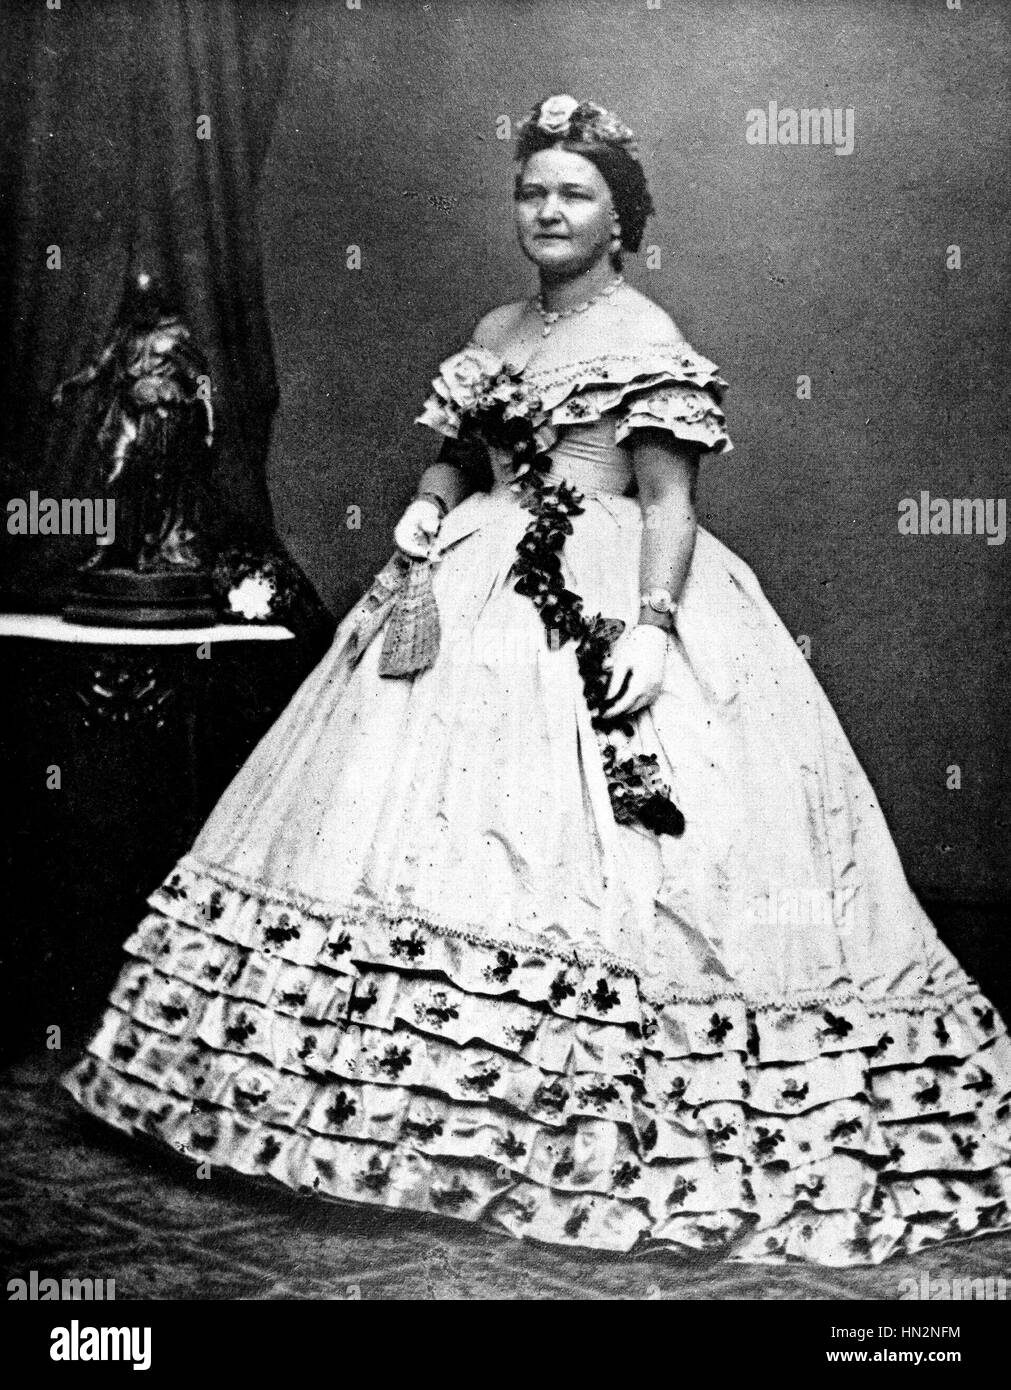 Mary Todd Lincoln, wife of Abraham Lincoln 19th century United States Stock Photo